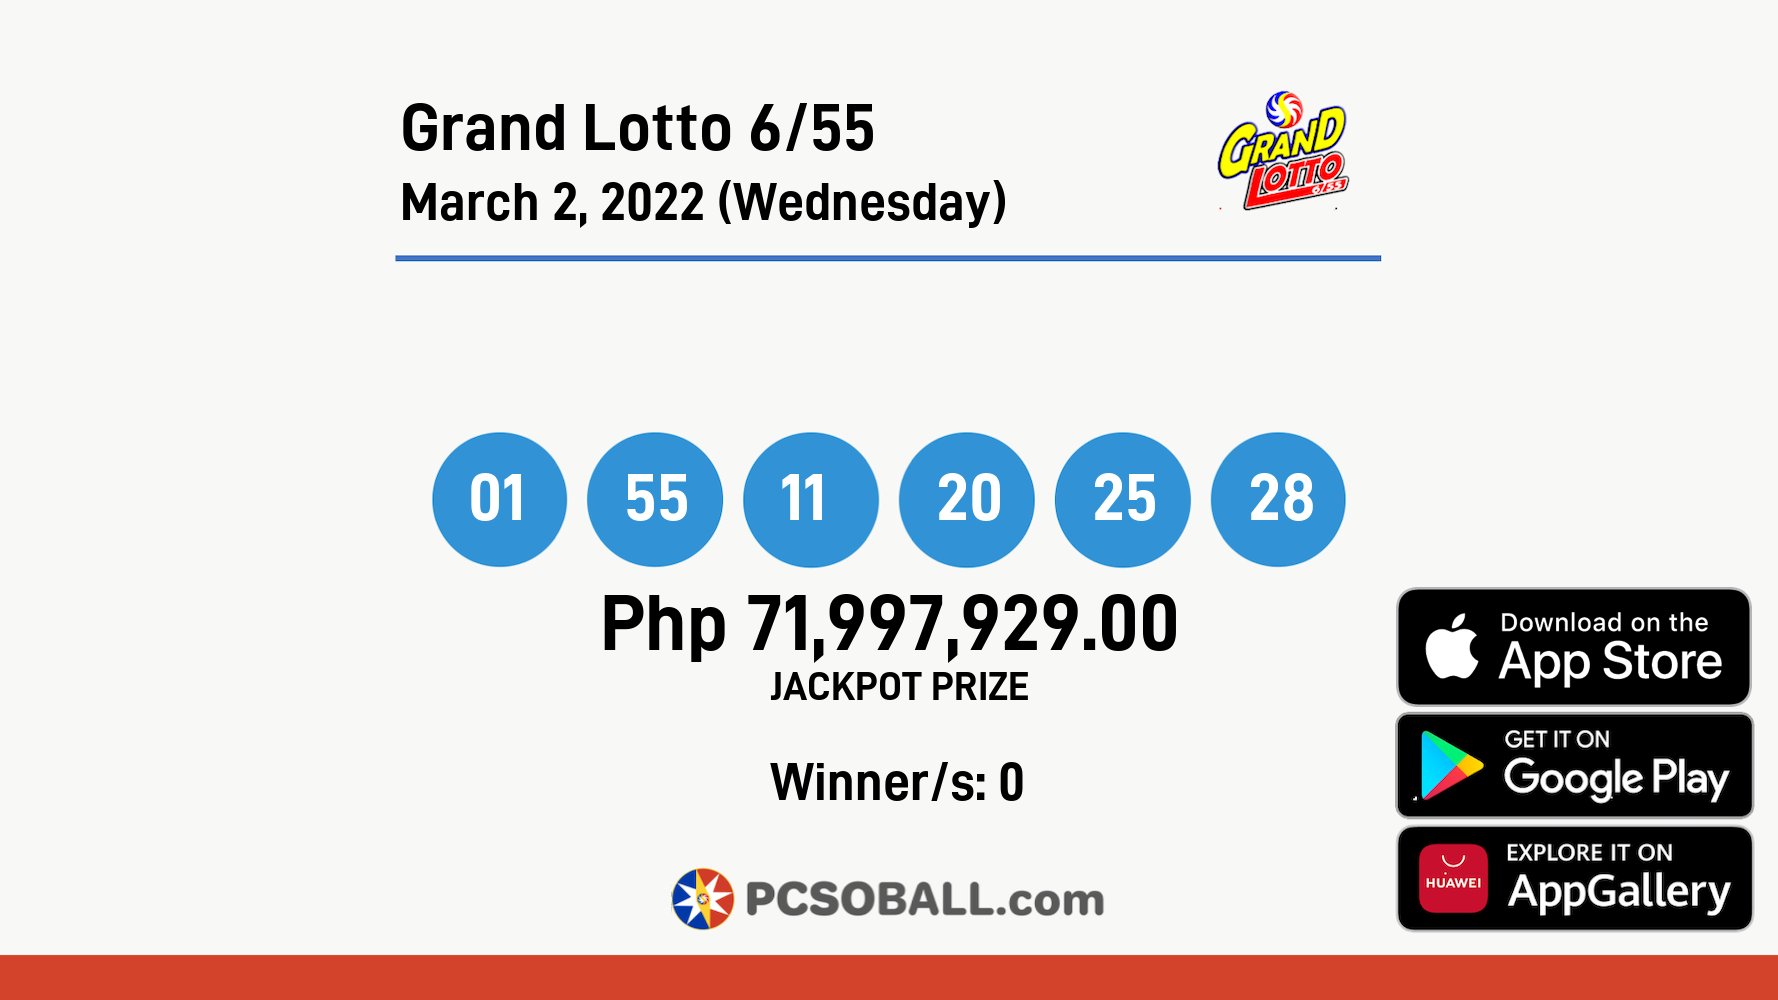 Grand Lotto 6/55 March 2, 2022 (Wednesday) Result